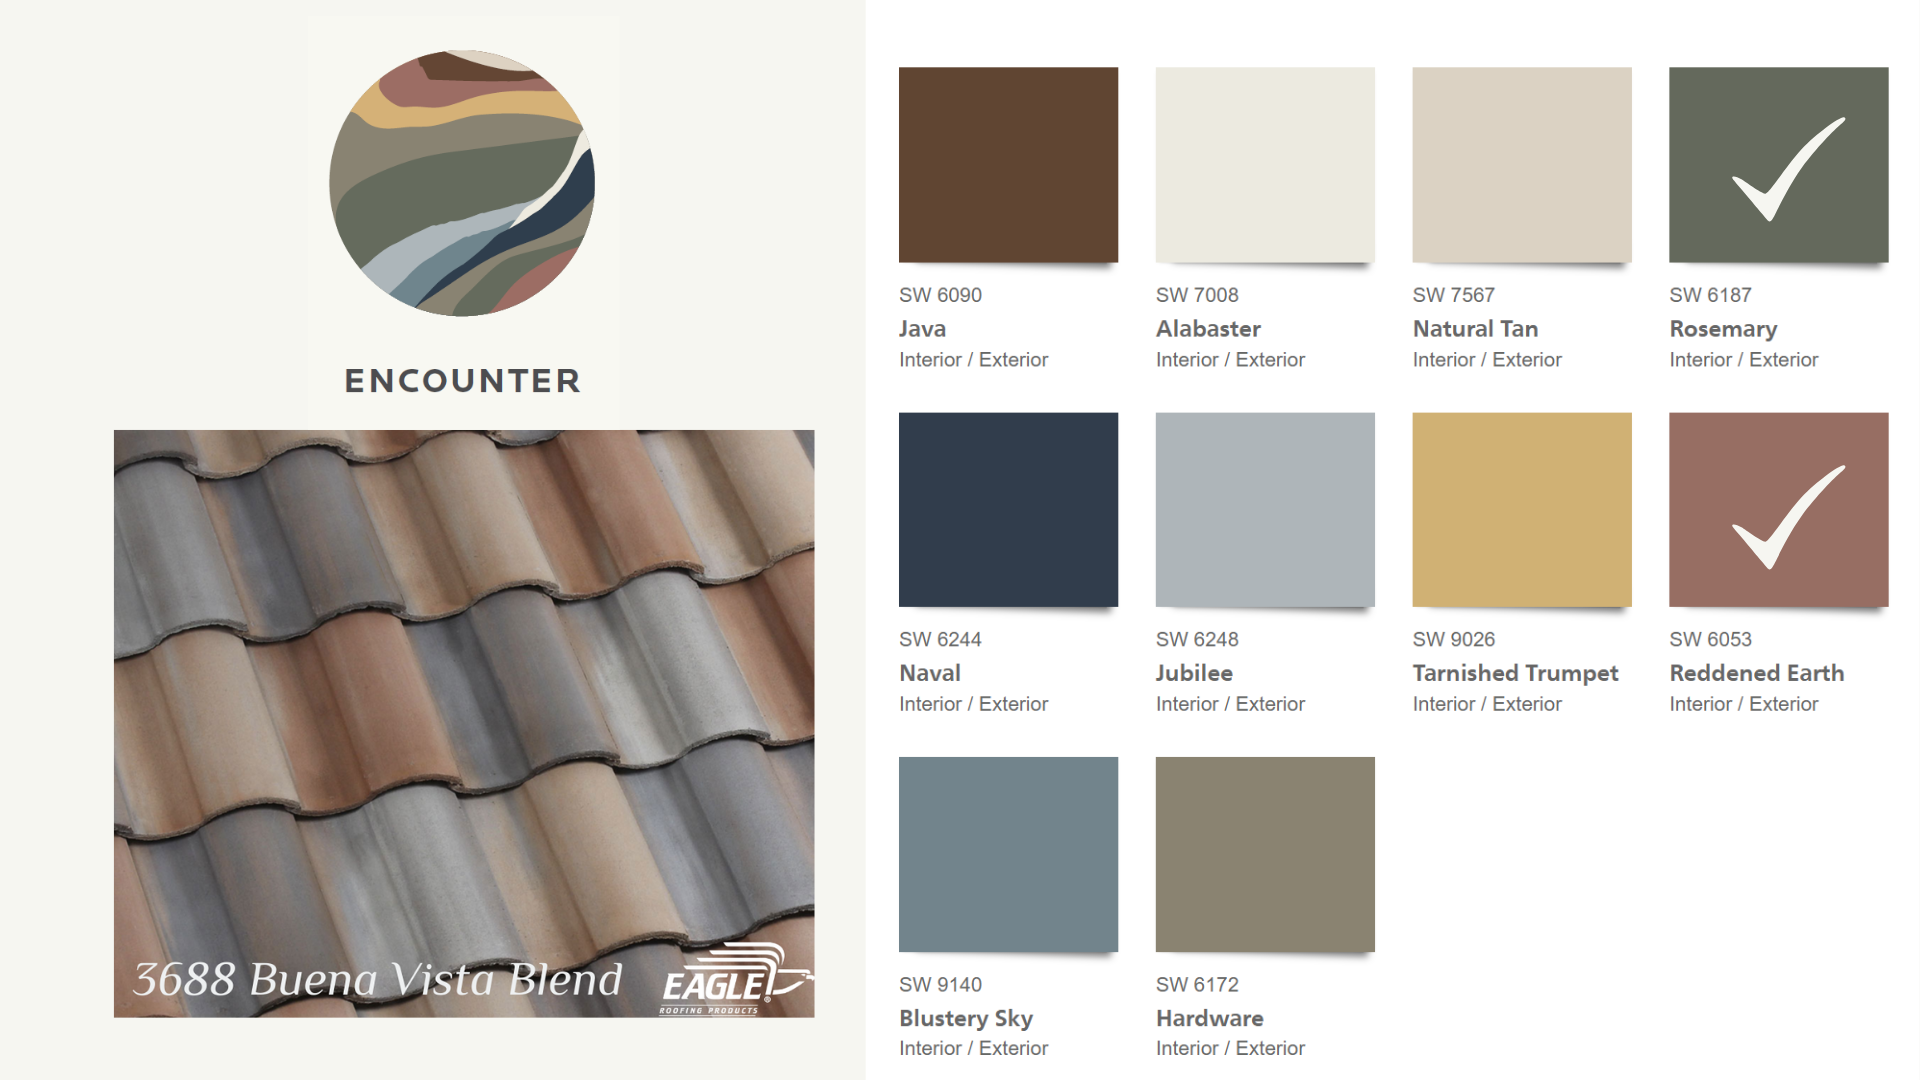 Concrete Roof Tiles to Pair with Sherwin Williams 2021 Color Trends - Eagle  Roofing